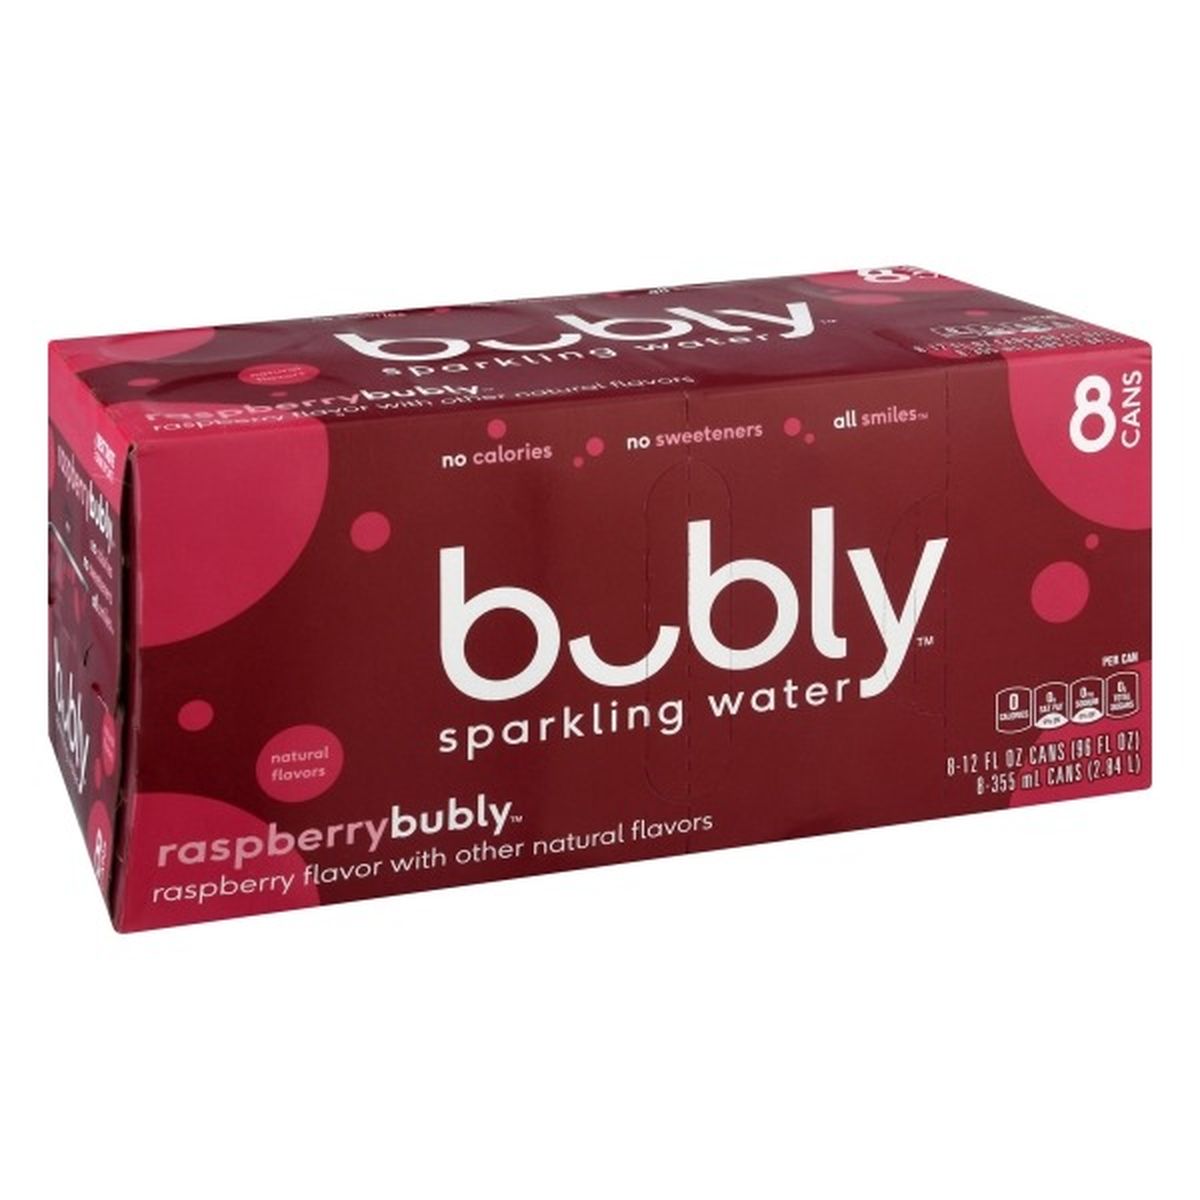 Calories in bubly Sparkling Water, Raspberry